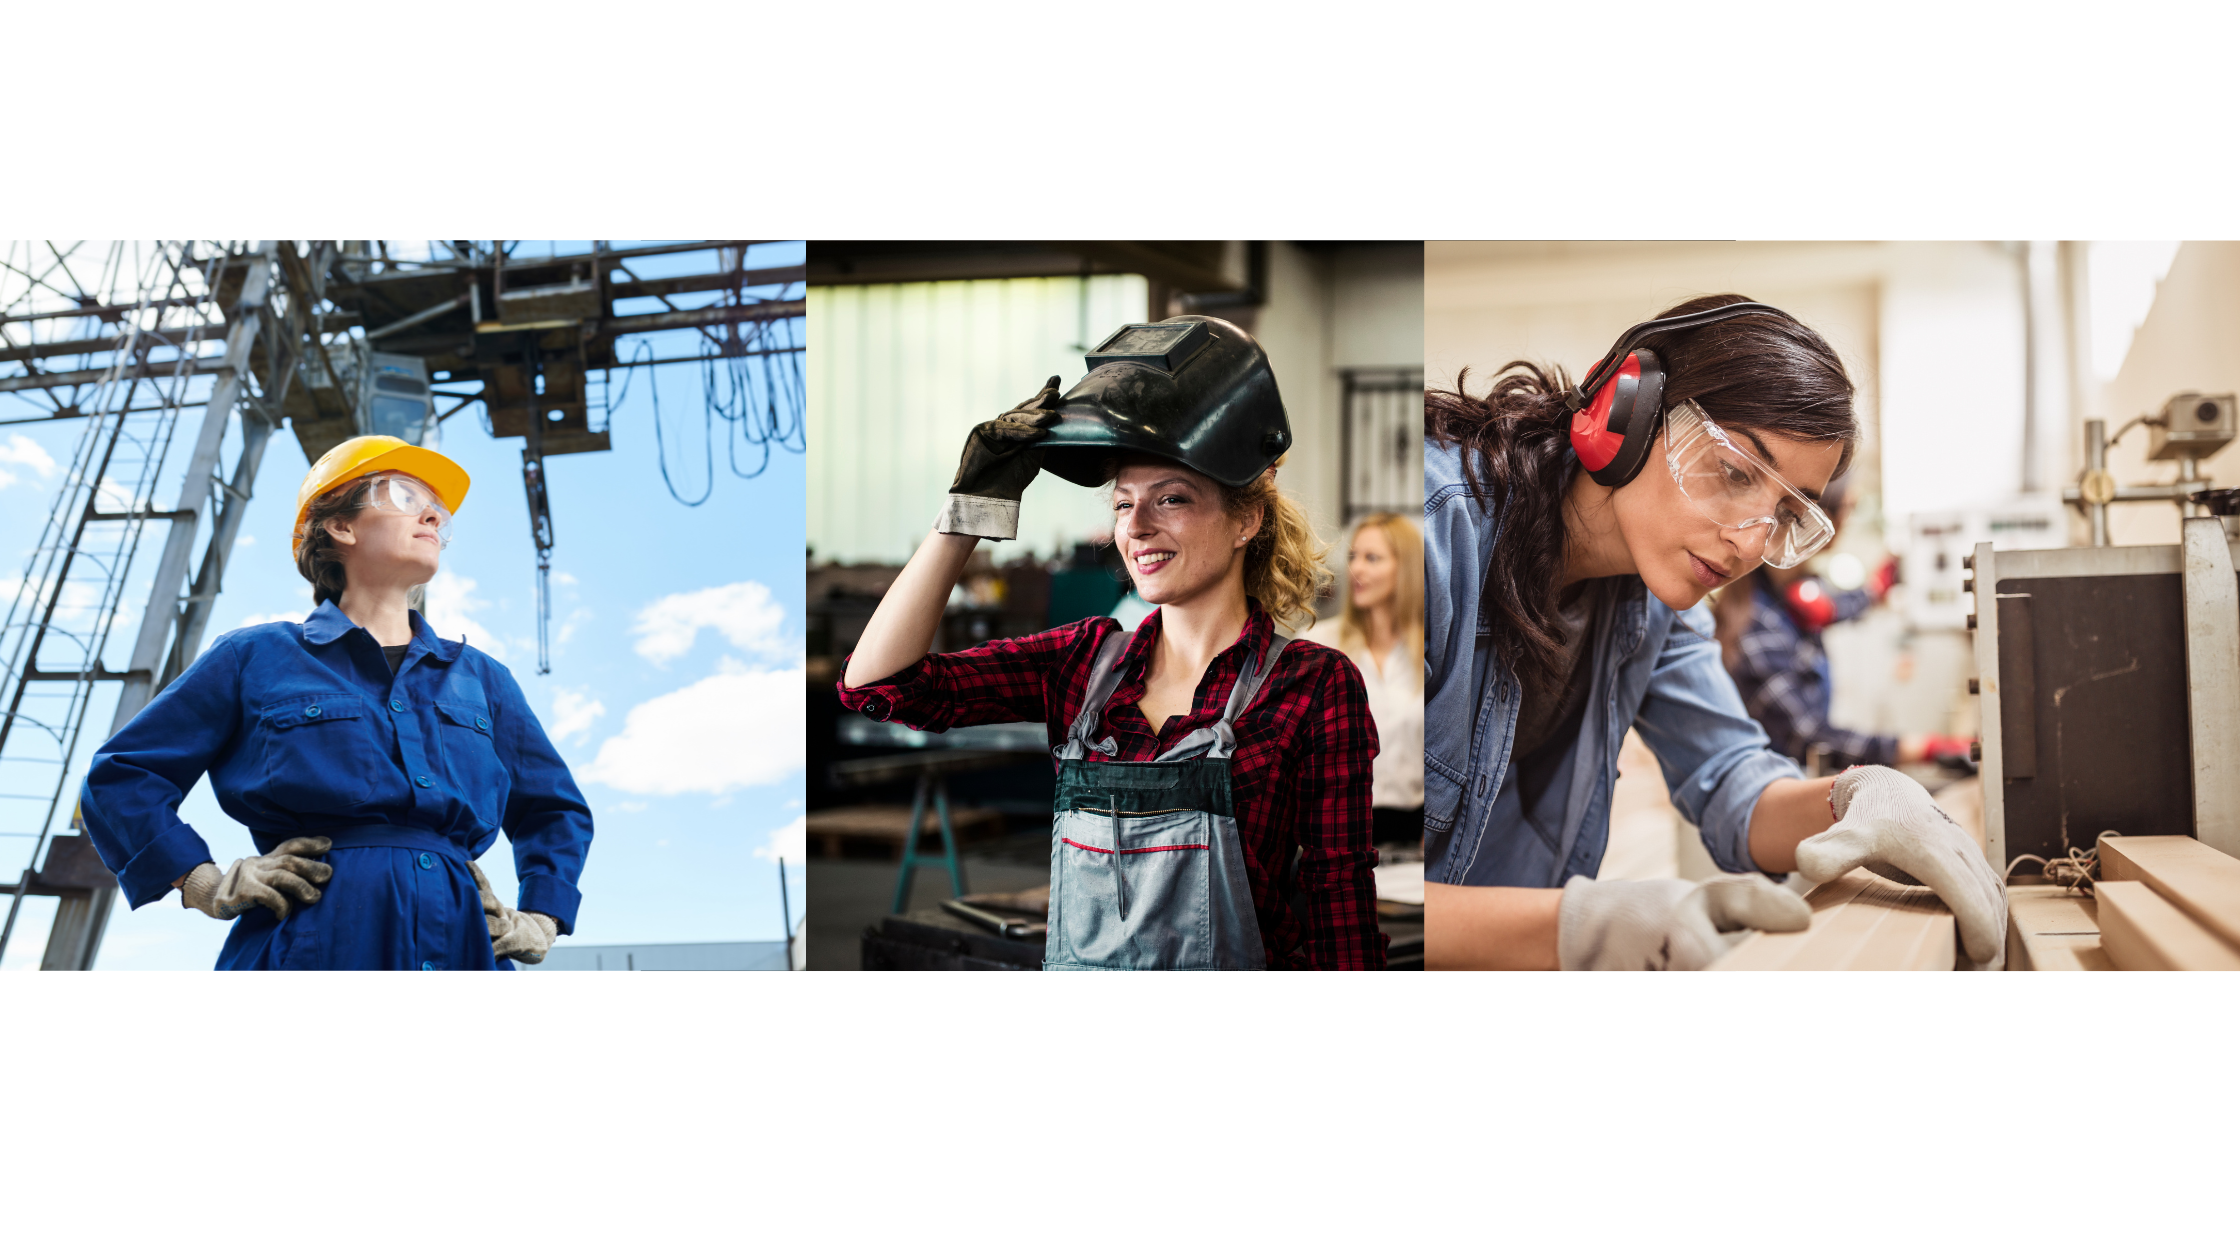 Why women in trades is a great idea.